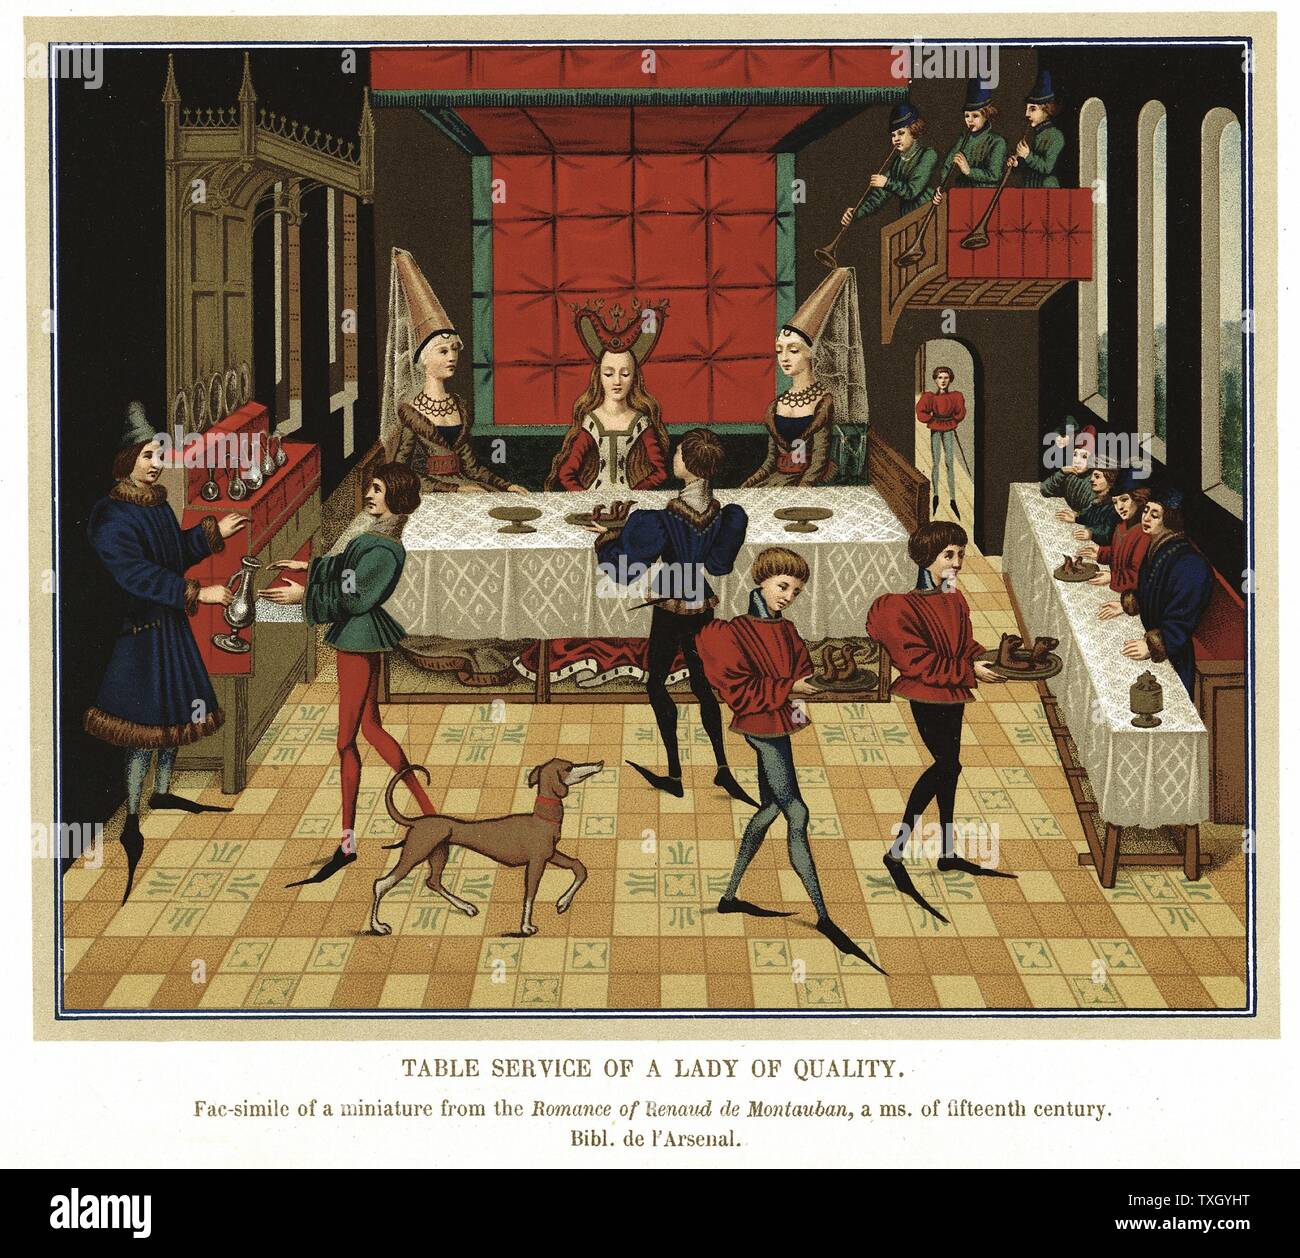 French noblewoman dining with members of her household, waited on by servants and Butler wearing tunic, hose, and long pointed shoes. Trumpeters play in musicians gallery. Floor laid with encaustic tiles. Chromolithograph after 15th century manuscript 'Romance de Renaud de Montauban' Stock Photo